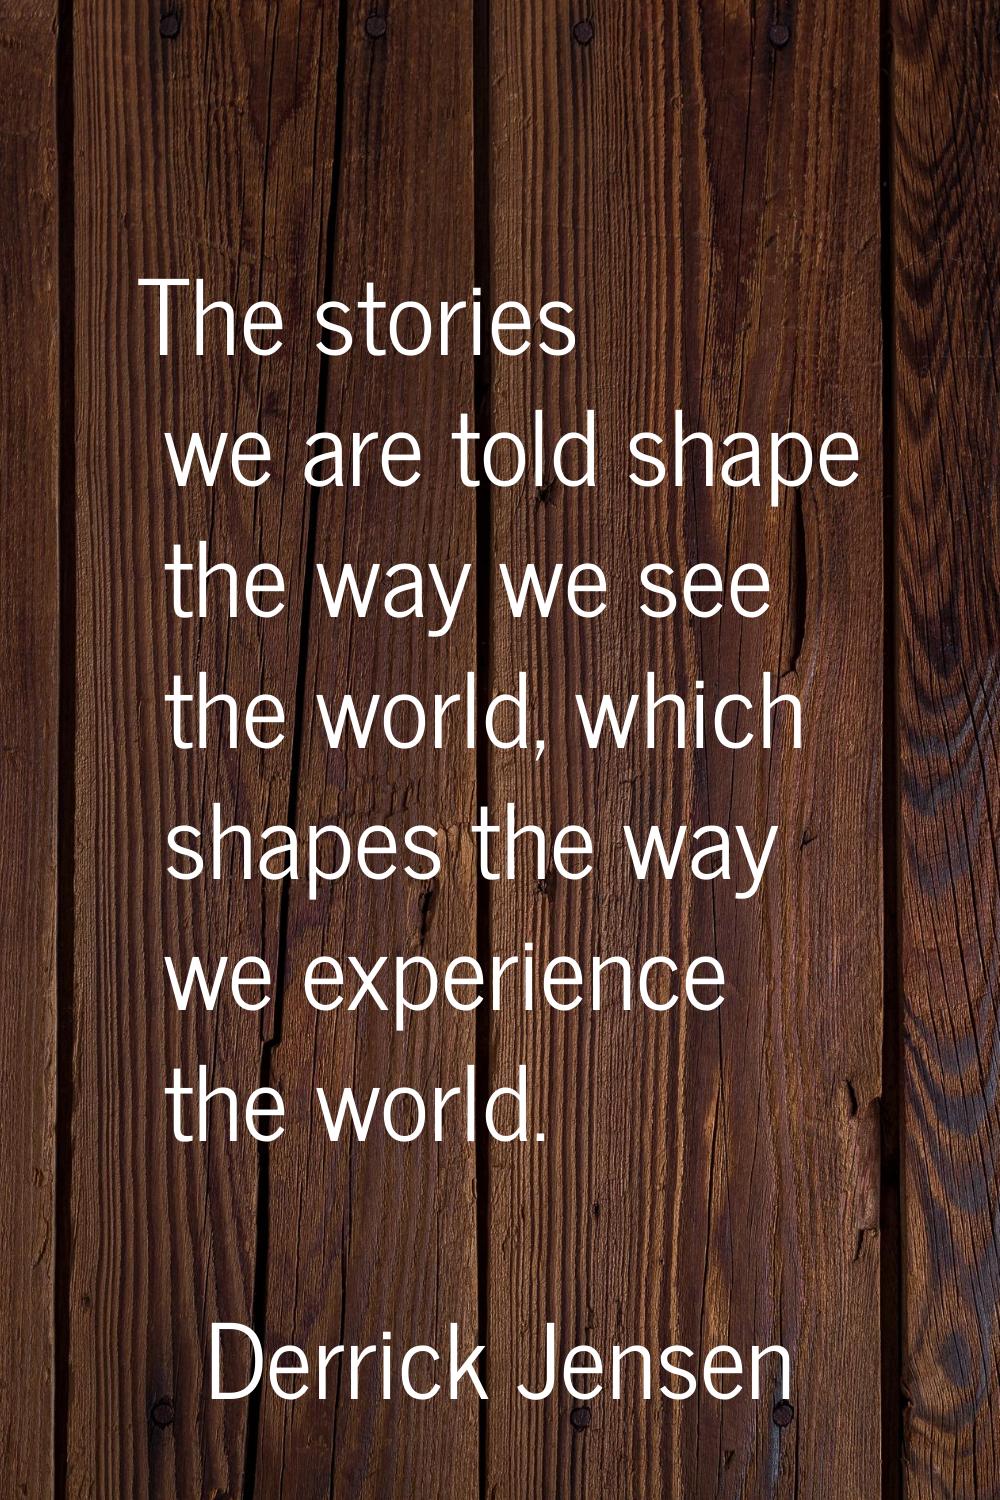 The stories we are told shape the way we see the world, which shapes the way we experience the worl